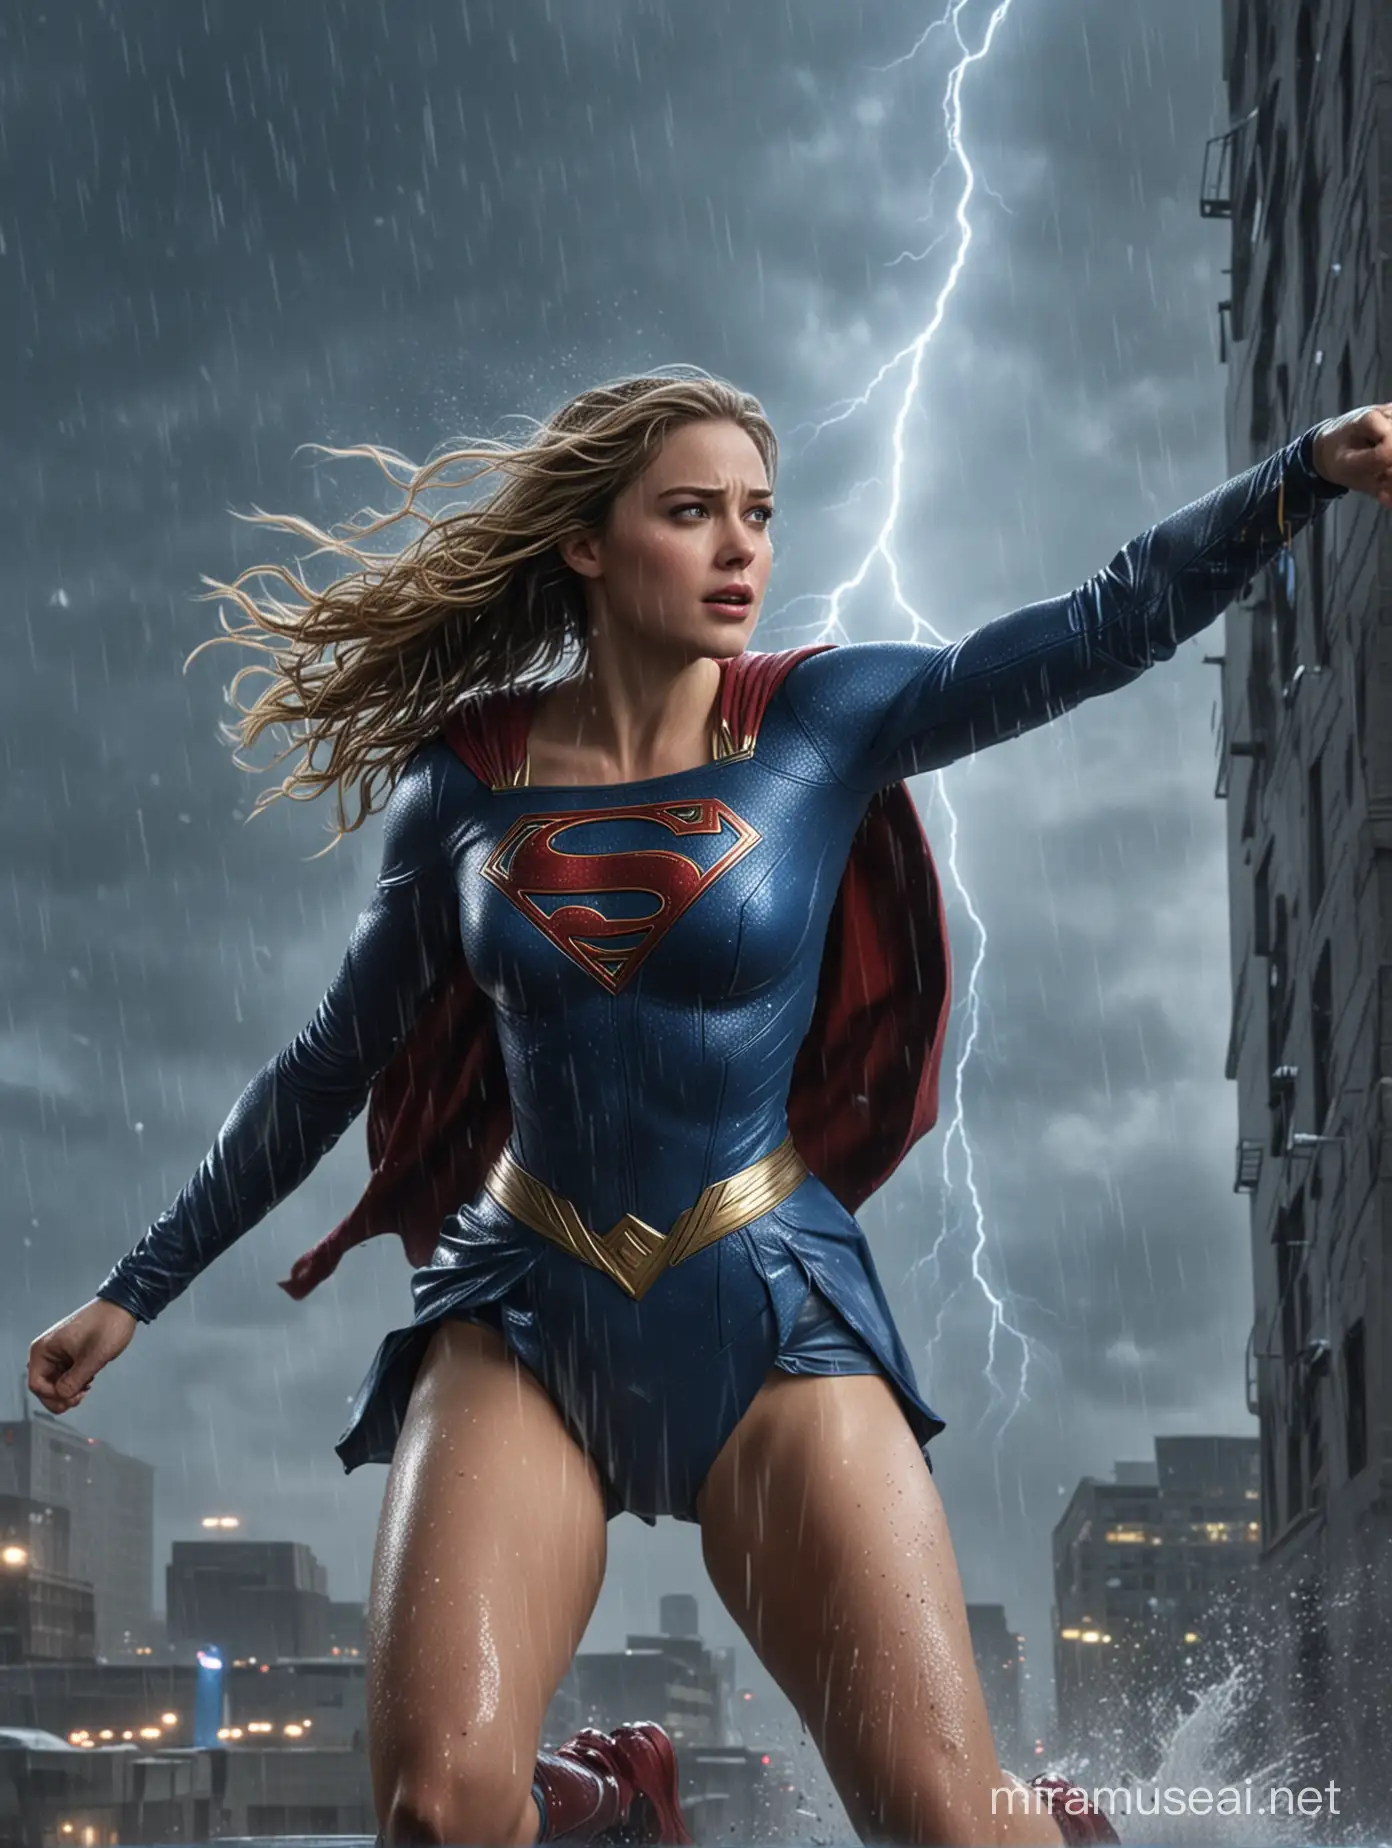 Supergirl Evades Wonder Womans Attack in RainDrenched Showdown